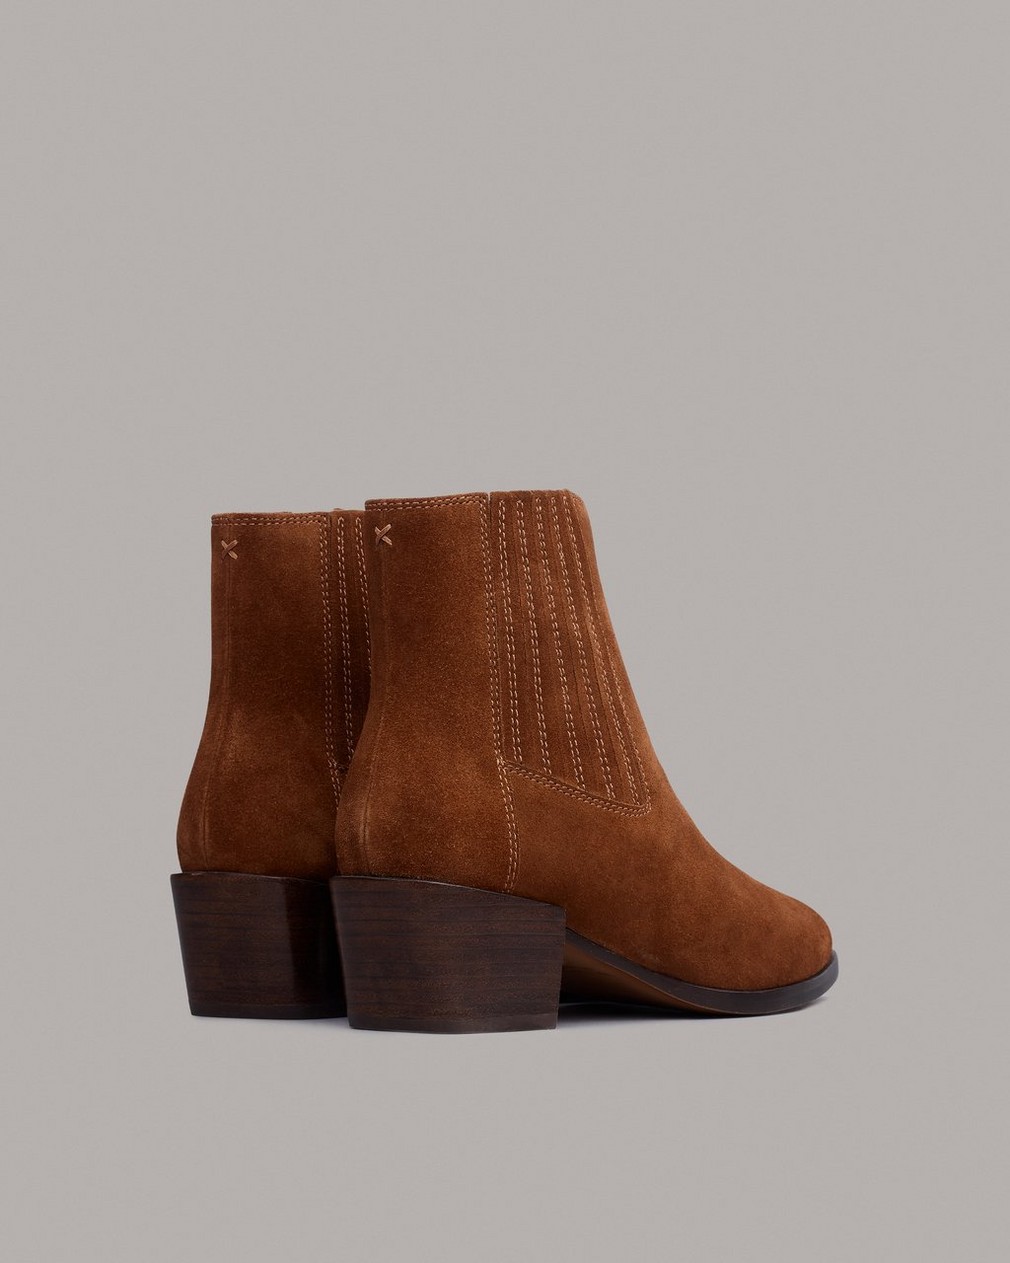 Rover Boot - Suede